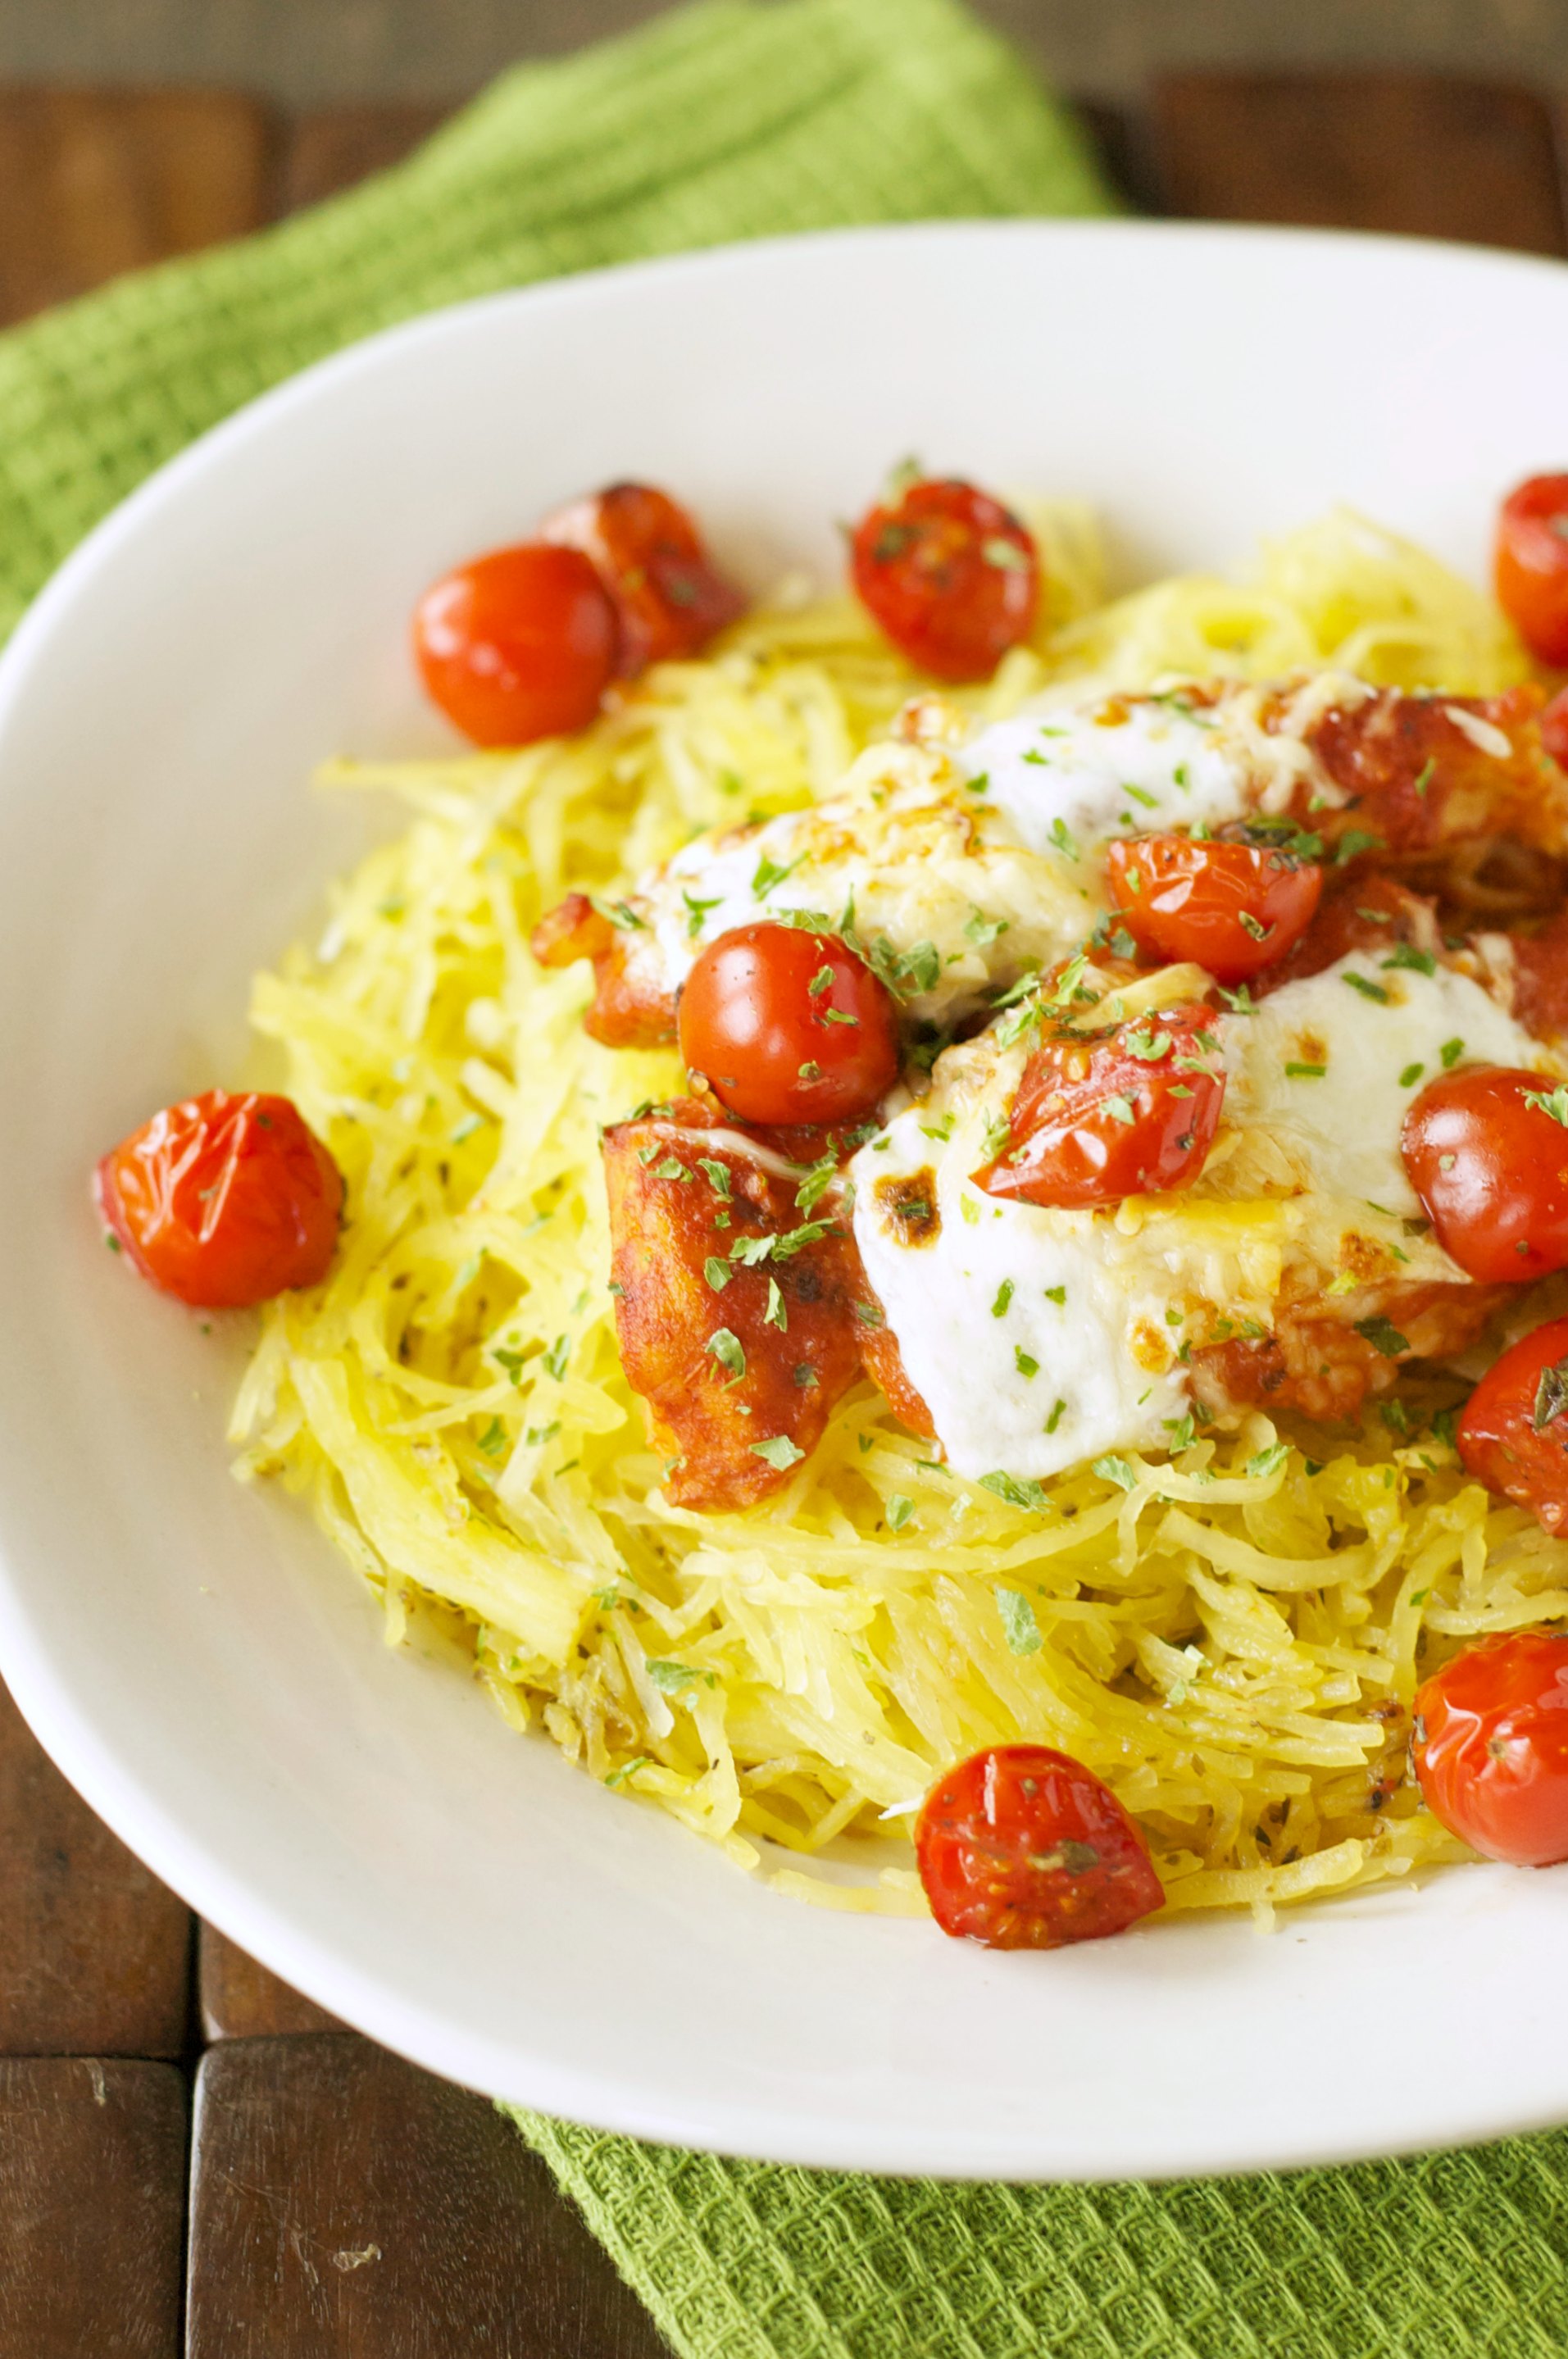 roasted tomatoes and chicken on bed of spaghetti squash in white bowl on green towel